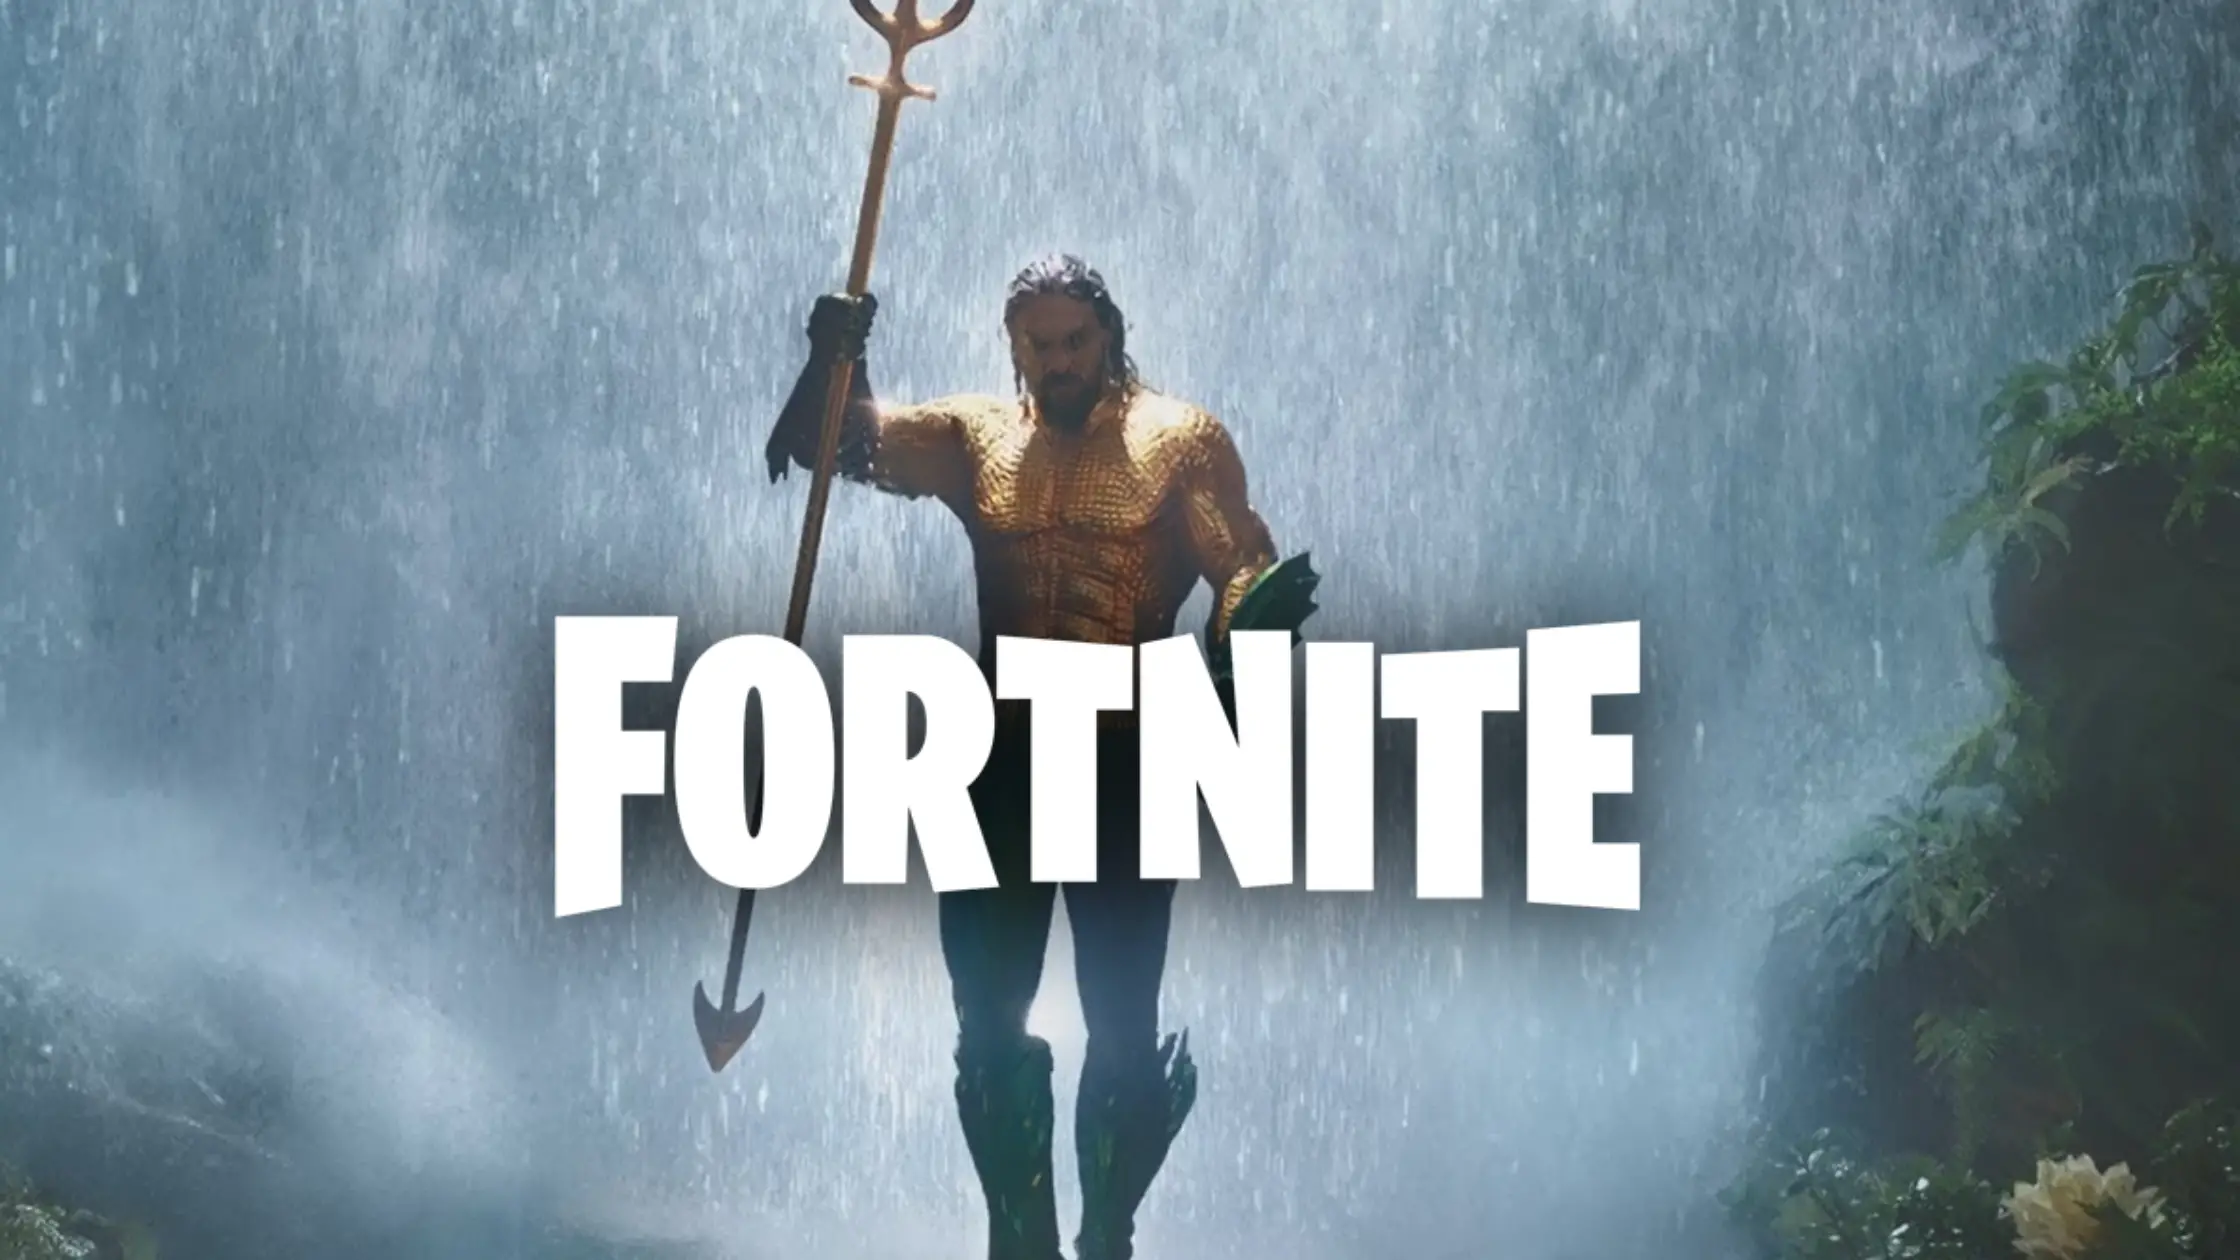 fortnite-x-aquaman-crossover-is-possibly-the-next-crossover-in-season-3